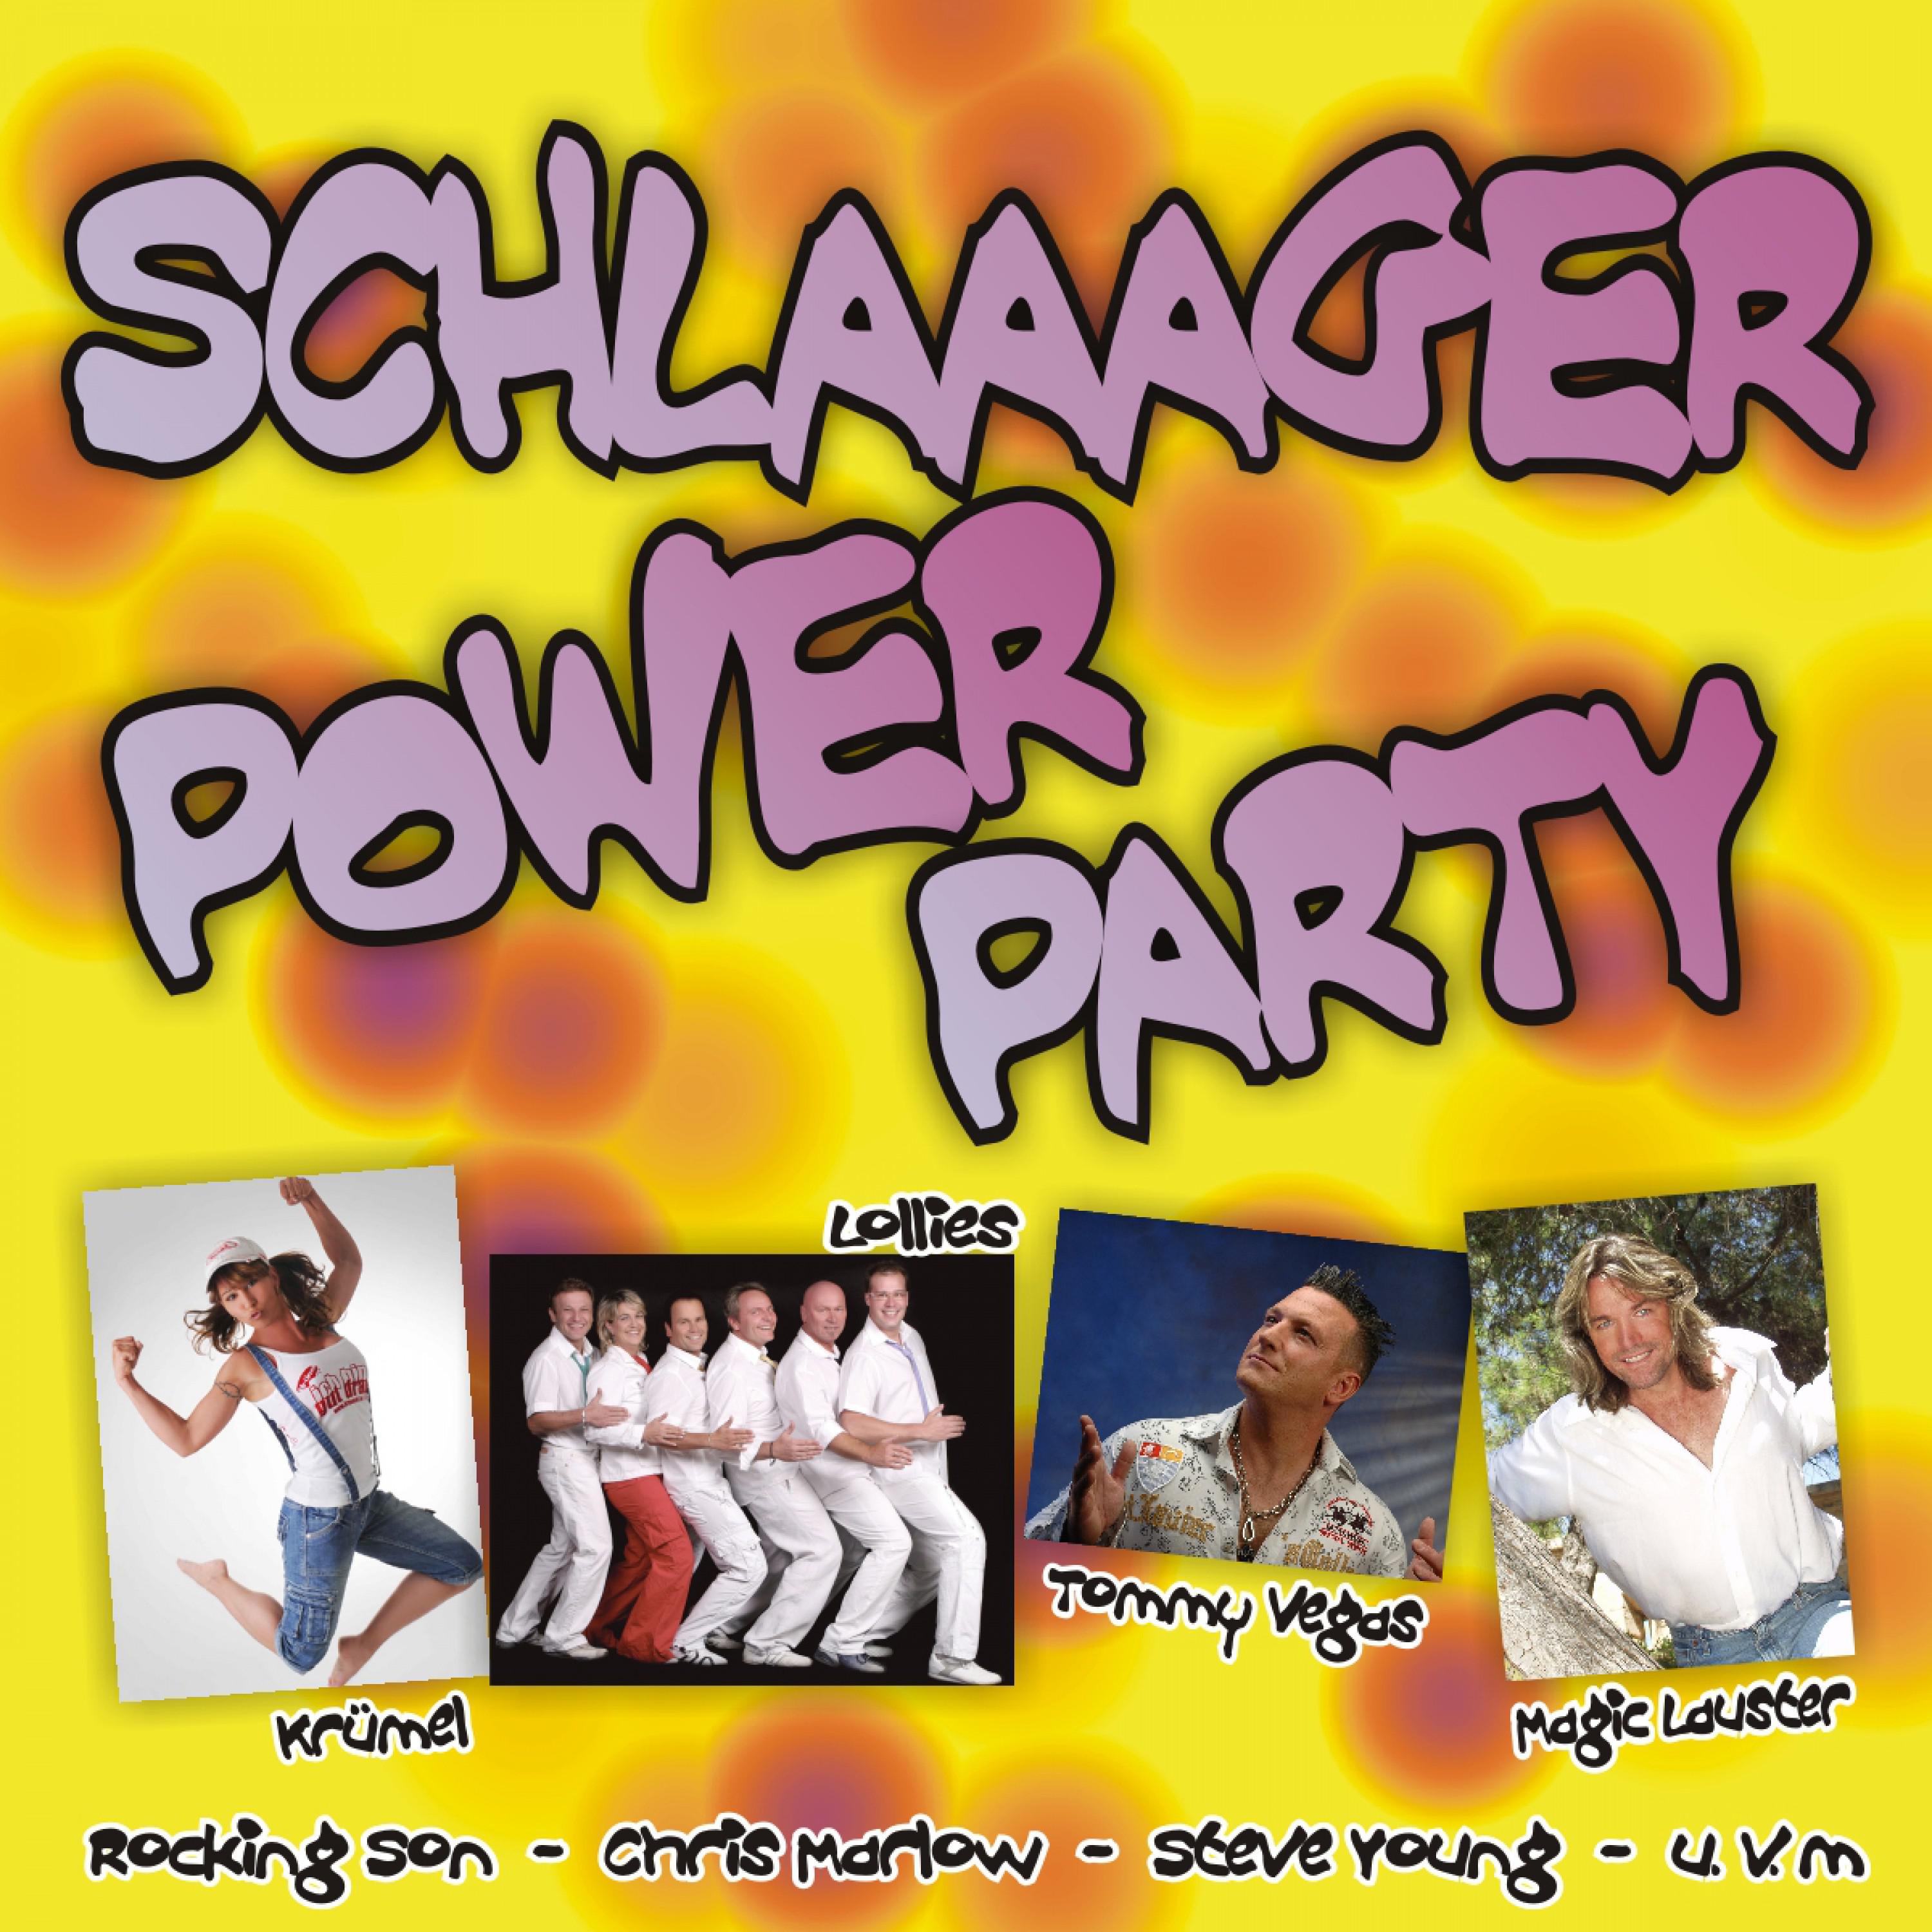 Schlaaager Power Party